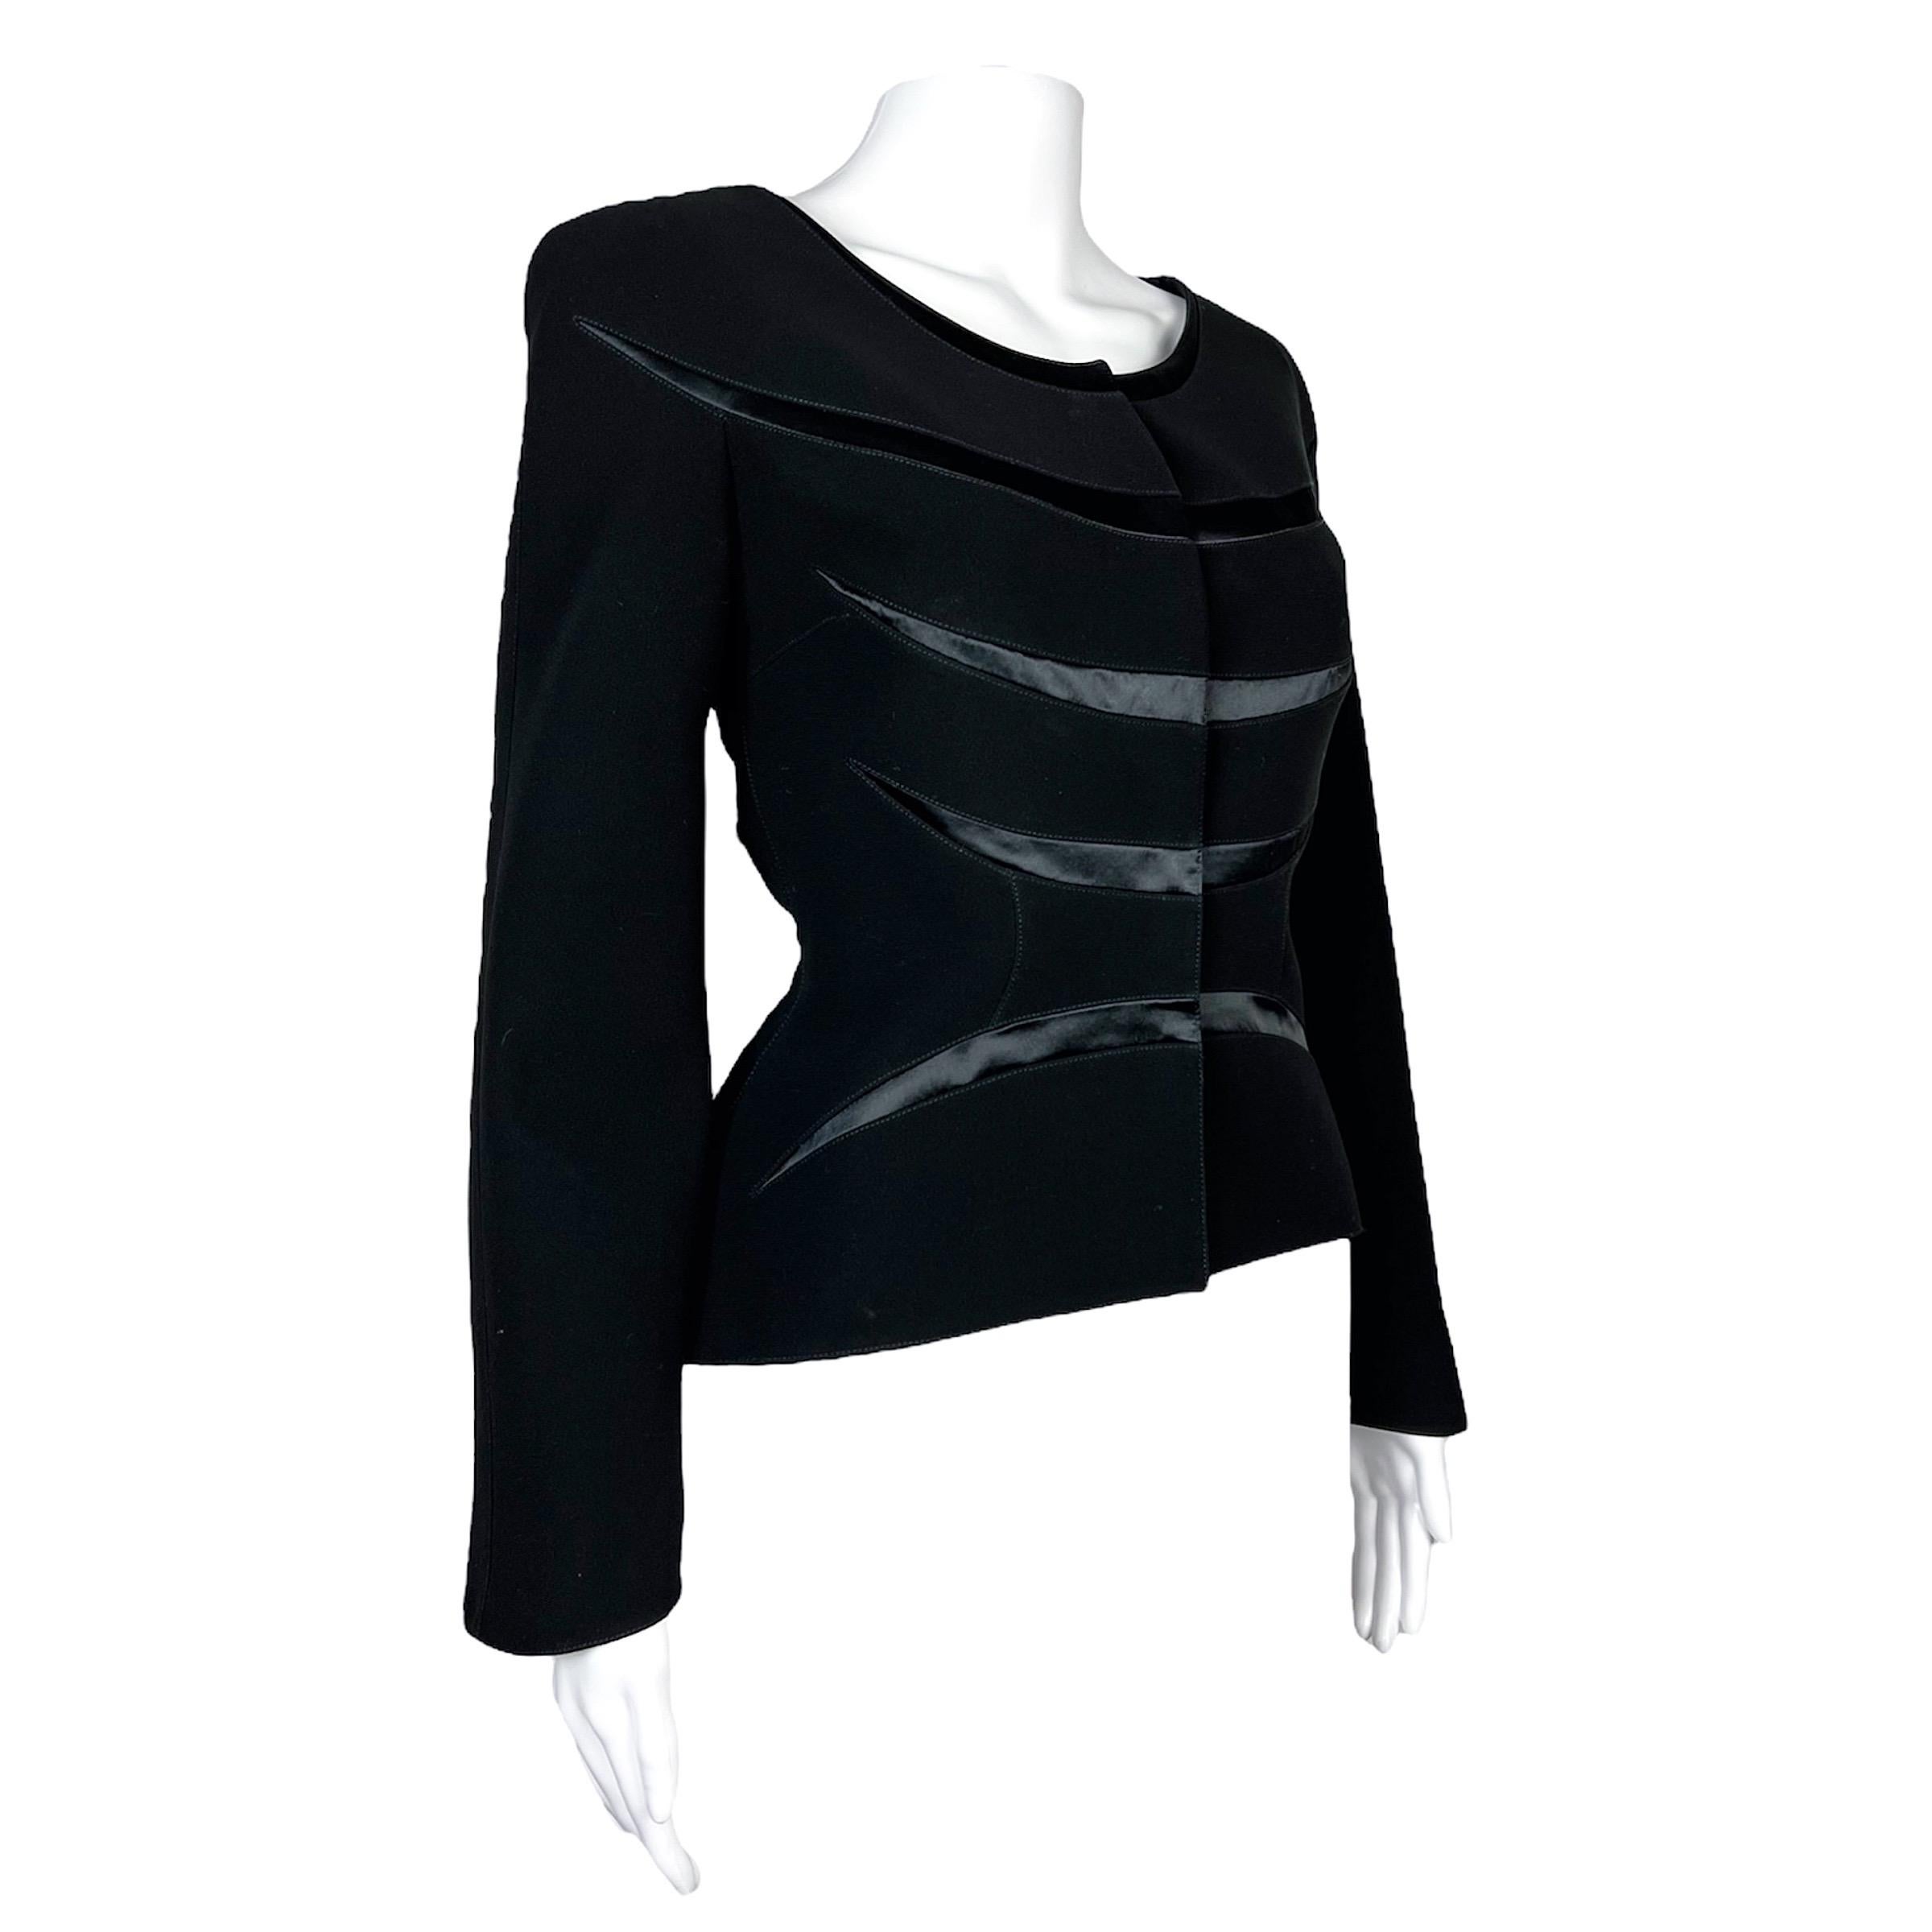 Lovely Thierry Mugler black blazer with satin stripes on front and back from Spring Summer 2000 collection as seen on the runway that season. 

Size on tag is 42, make sure to report to measurements for accurate fitting. 

Measurements: 

Shoulders: